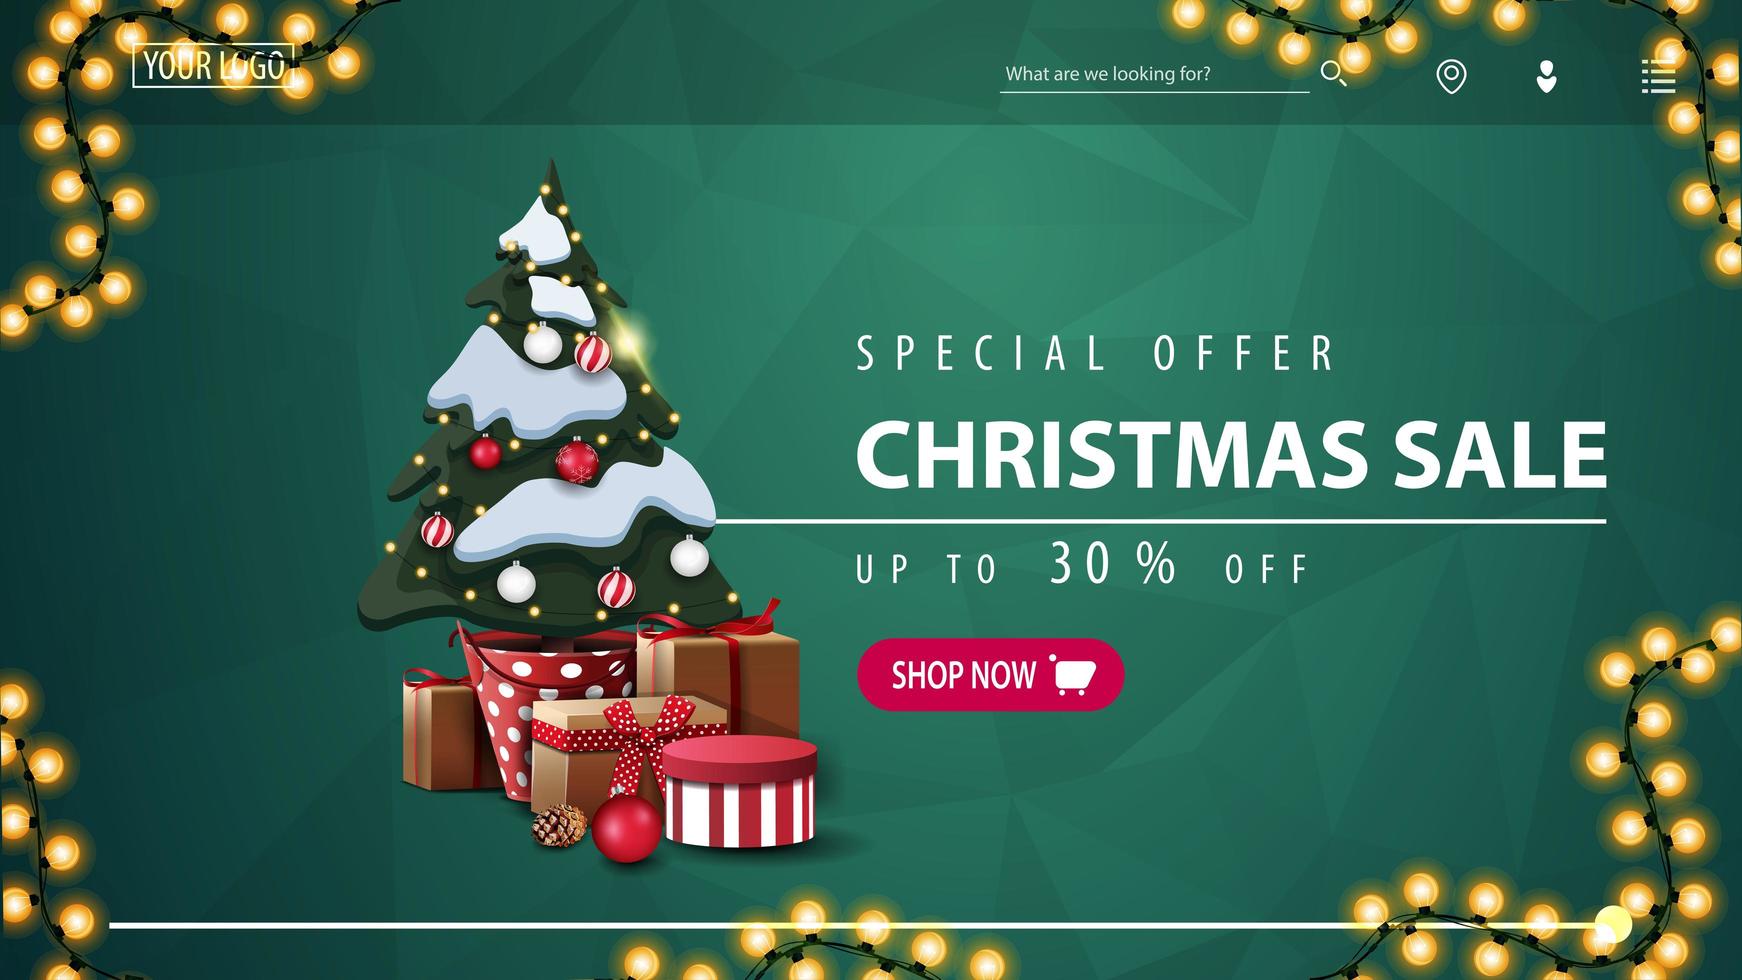 Special offer, Christmas sale, up to 30 off, green discount banner for website with polygonal texture, garland, pink button and Christmas tree in a pot with gifts vector